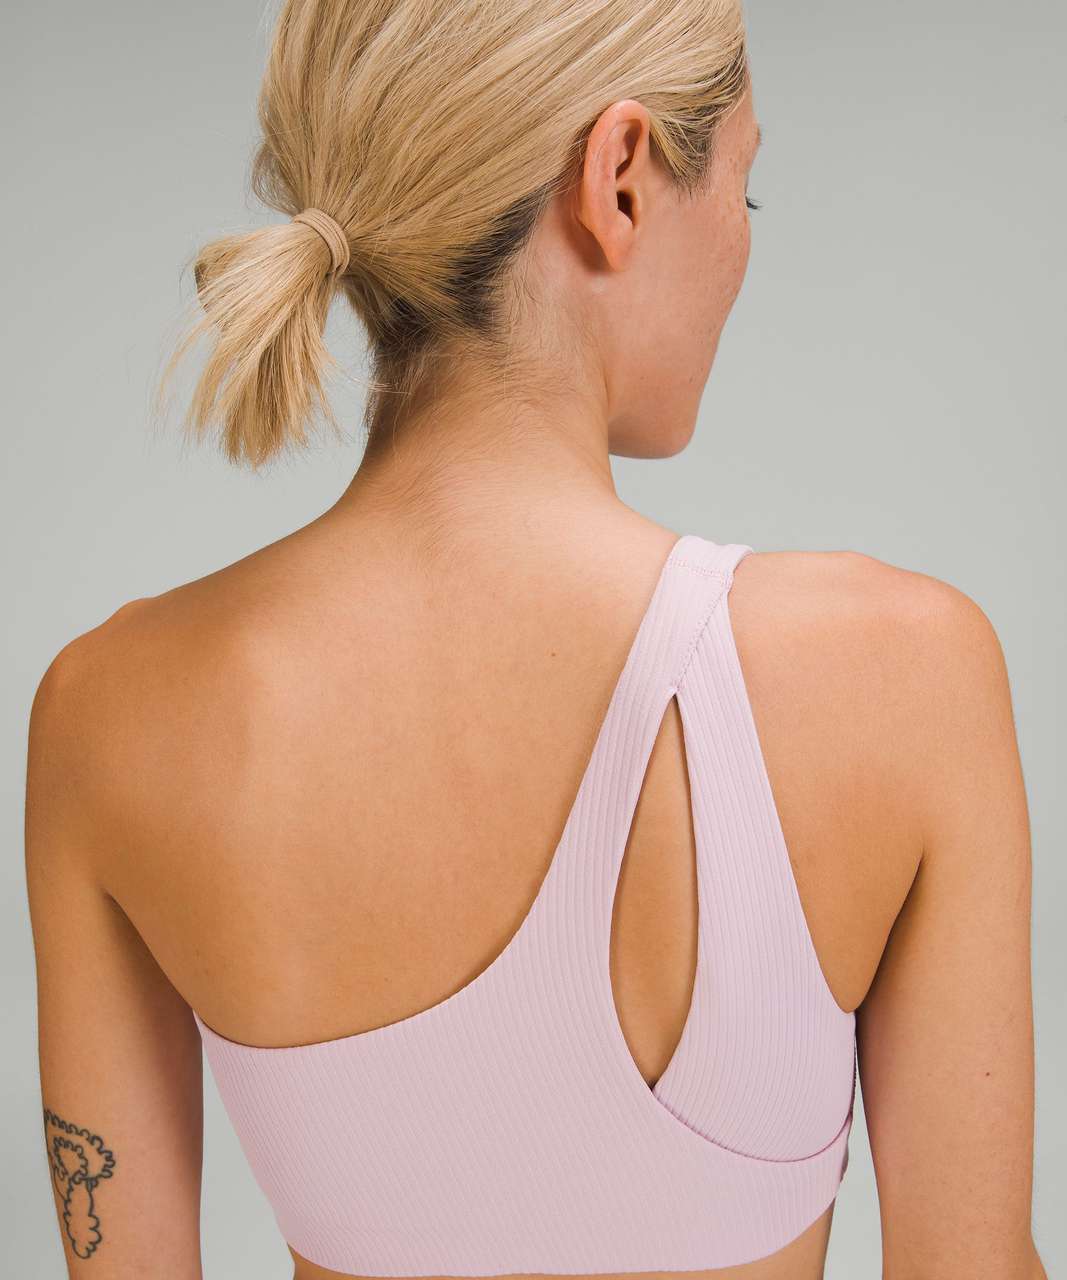 Women's Light Support Rib Triangle Bra - All in Motion Pink M 1 ct